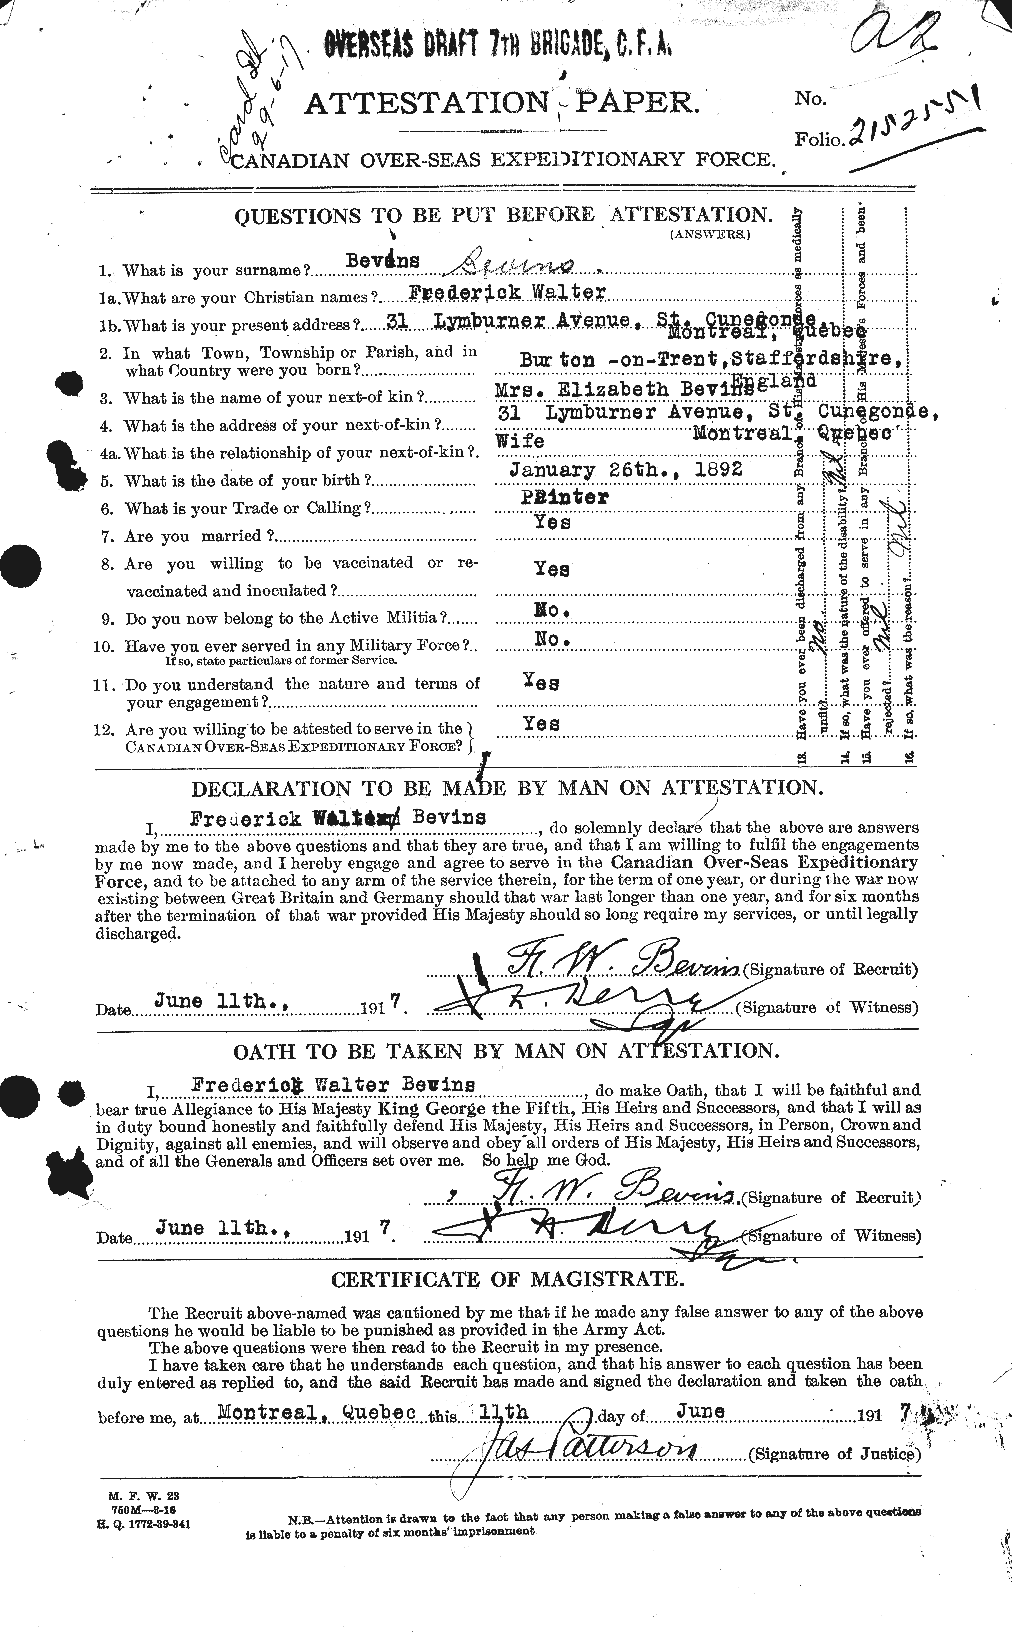 Personnel Records of the First World War - CEF 237422a